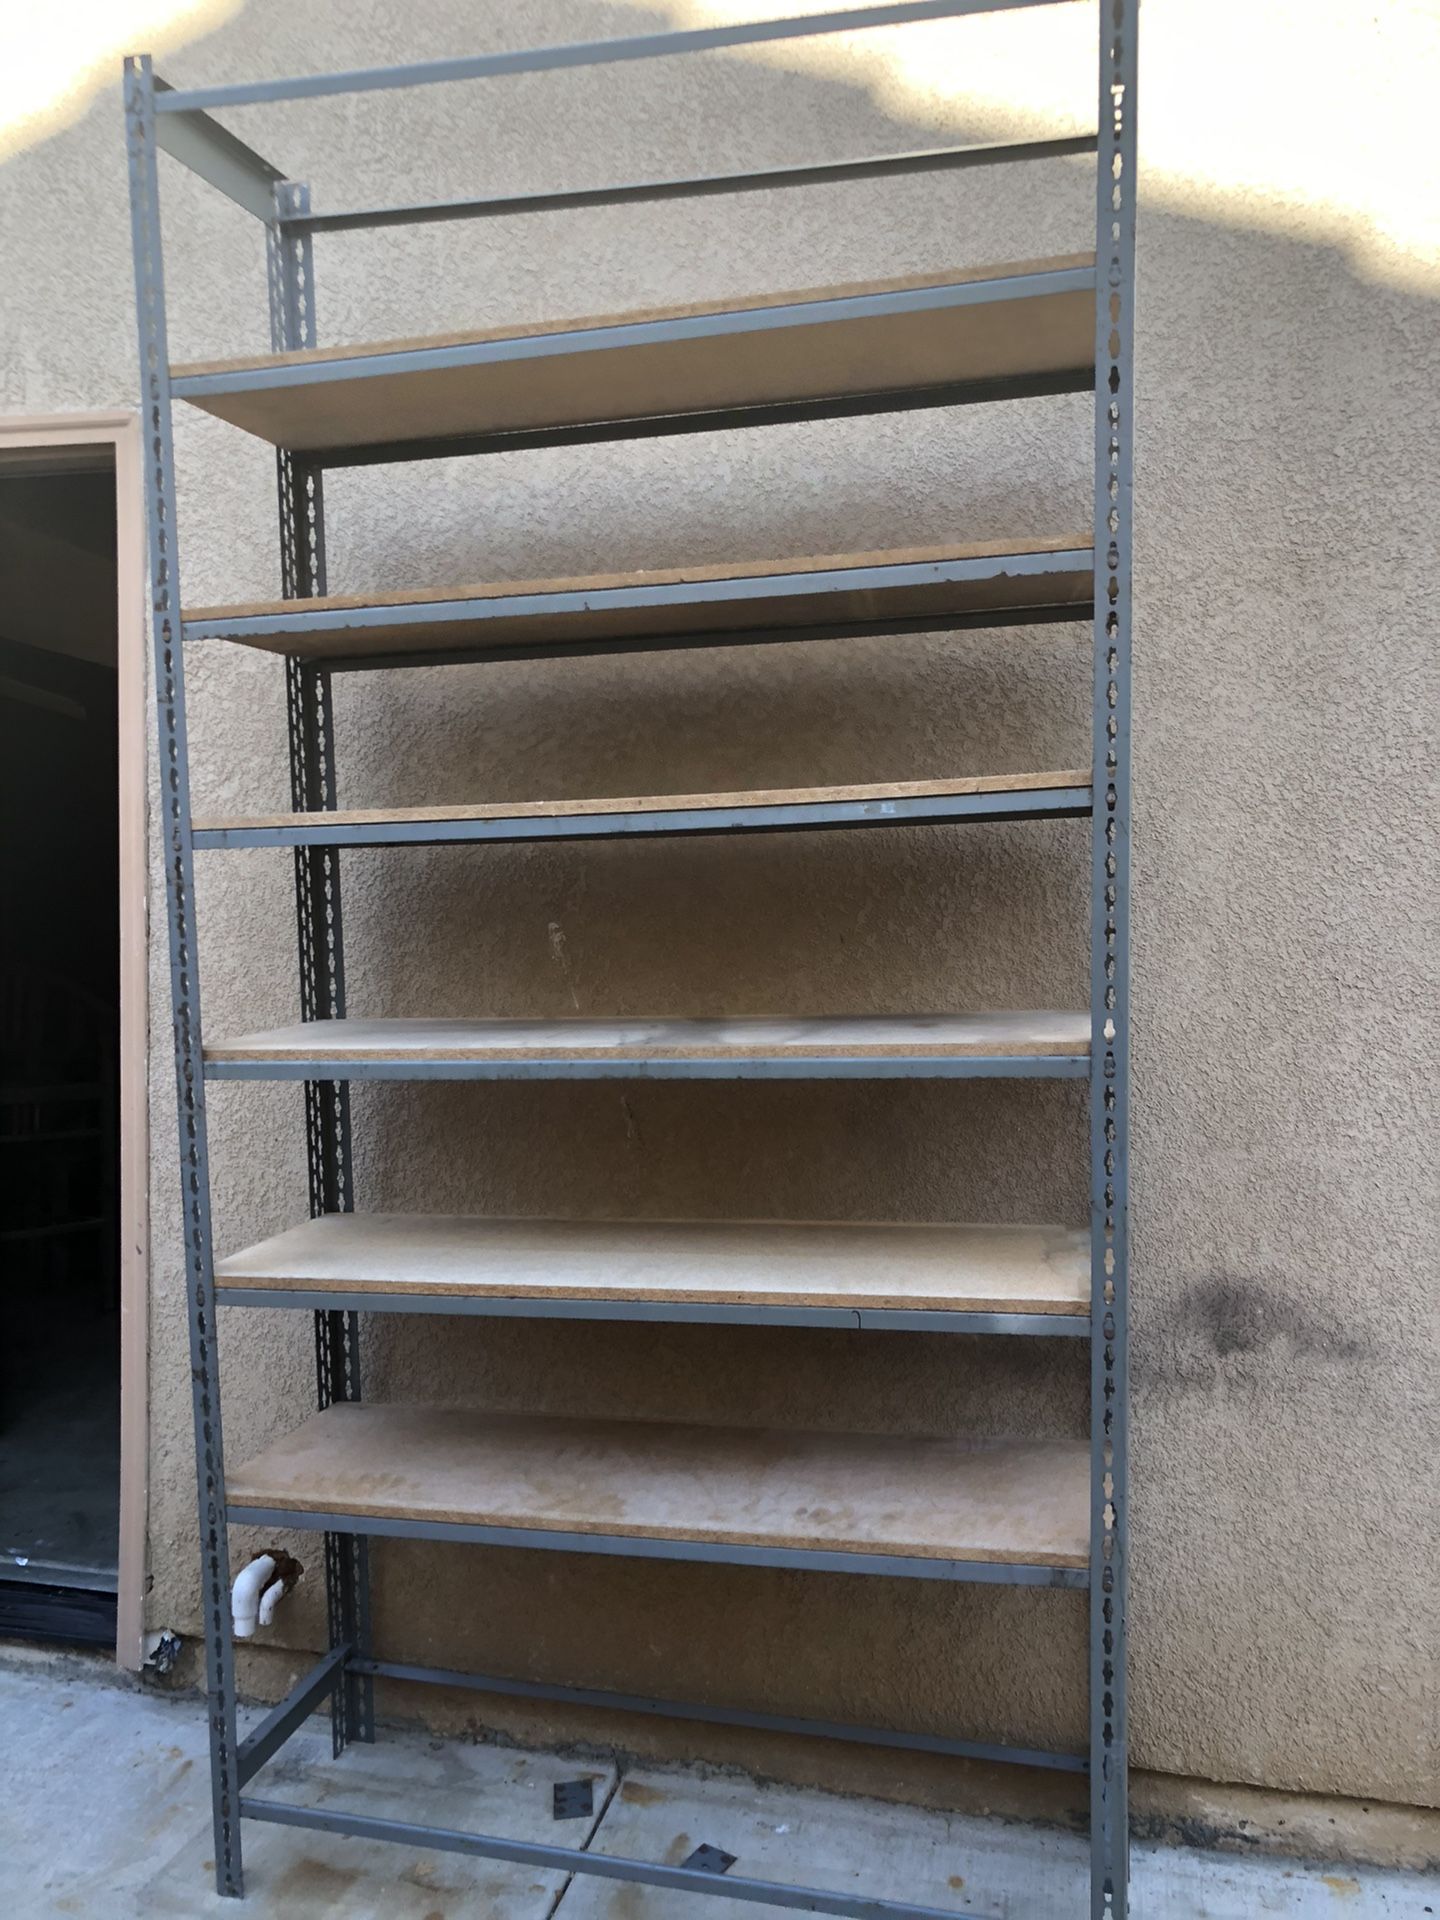 4 Tall metal shelves in good conditions